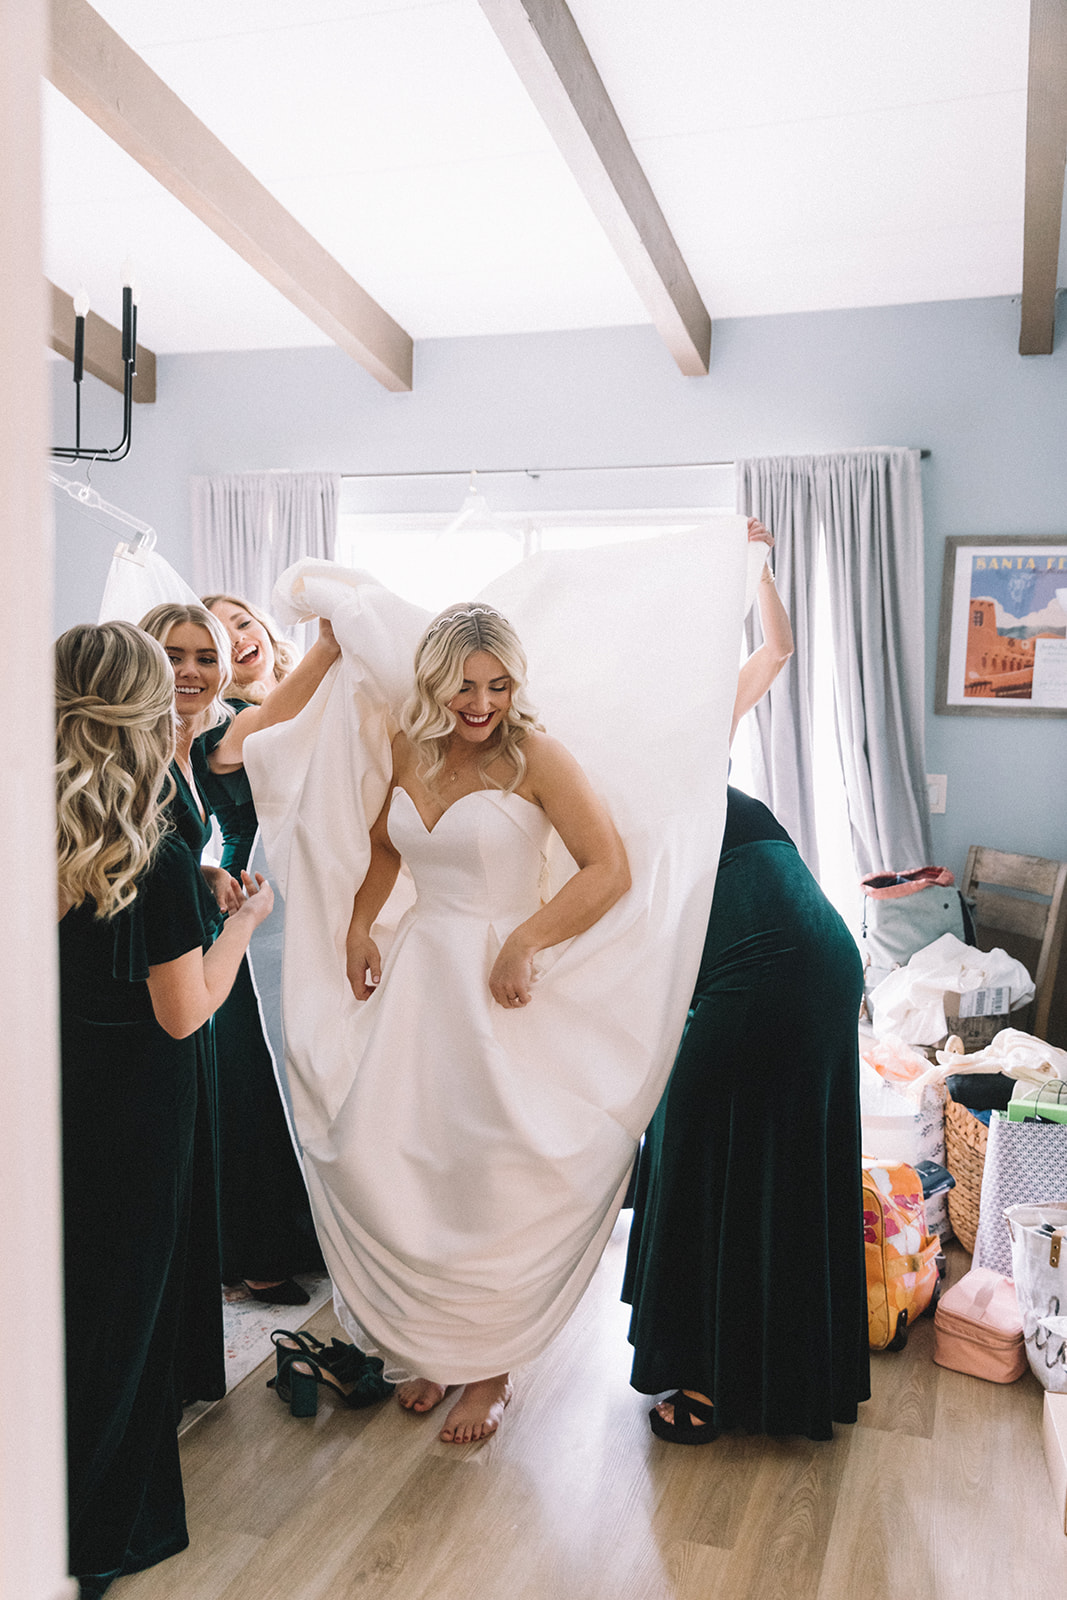 Bride gets dressed in her bridal gown surrounded by her best friends in their emerald bridesmaids dresses.